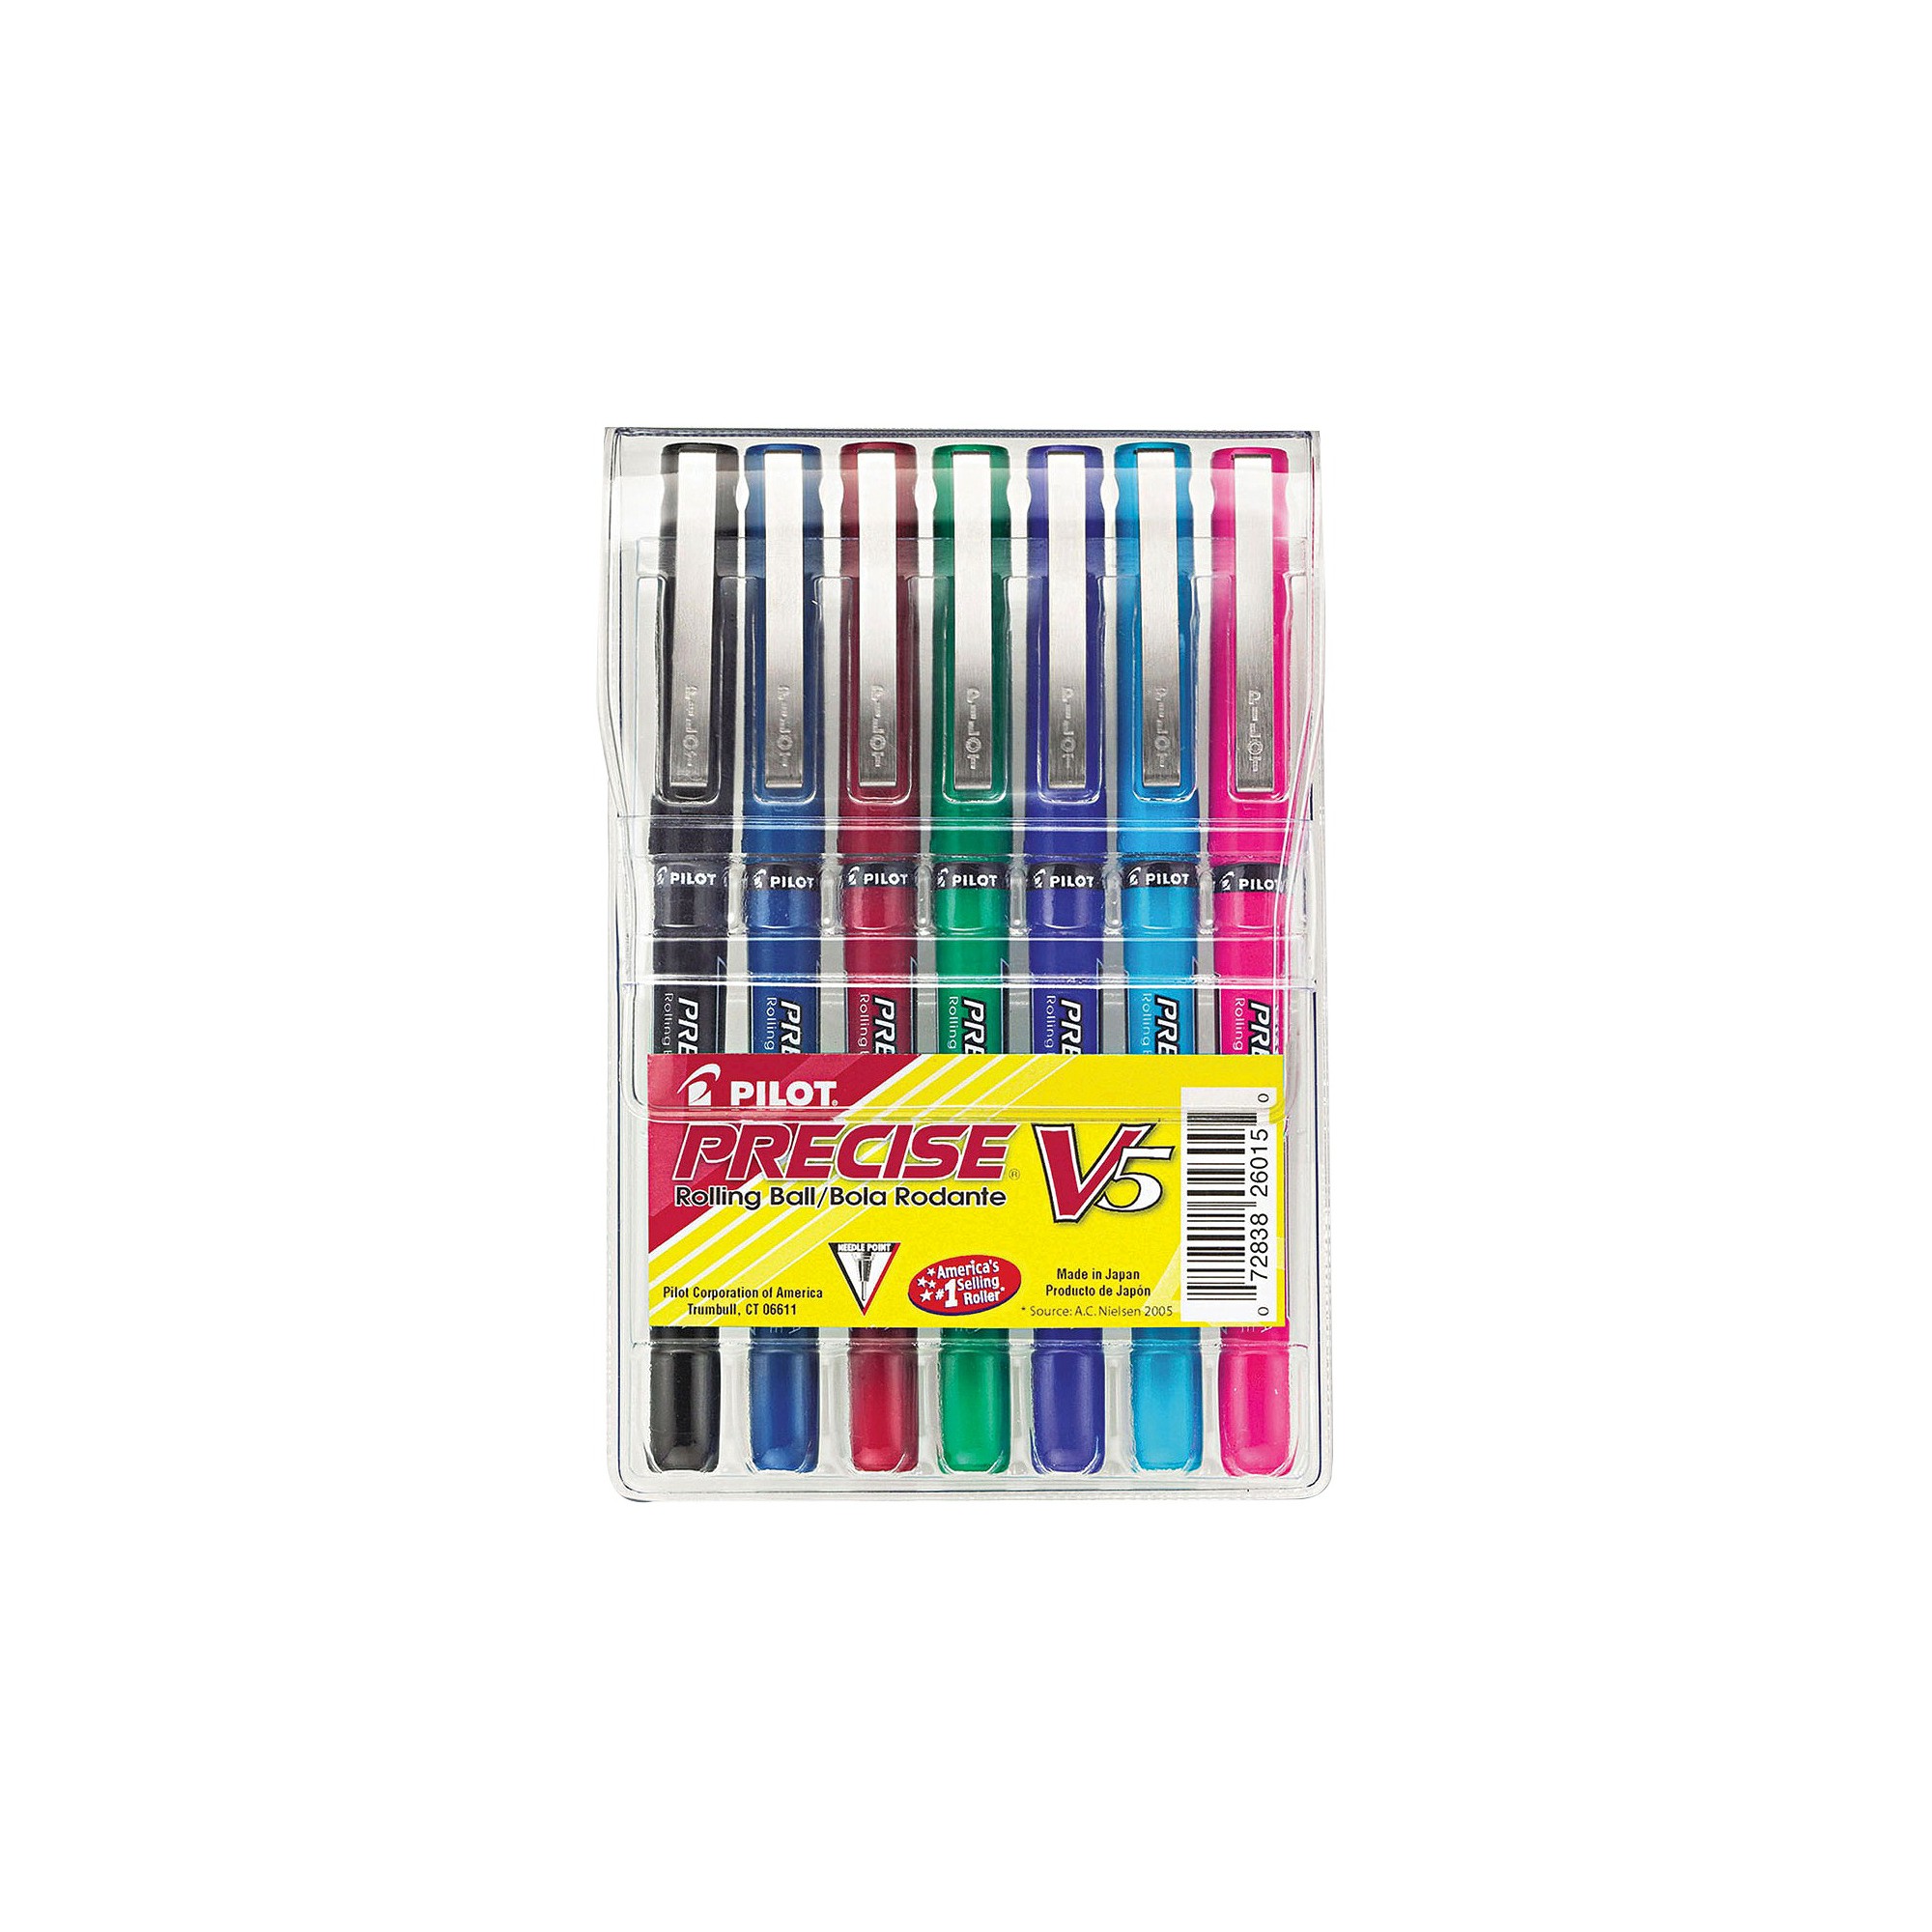 Pilot Precise V5 Roller Ball Stick Pen, Needle Point, 0.5mm Extra Fine - Assorted Inks (7 Per Pack)